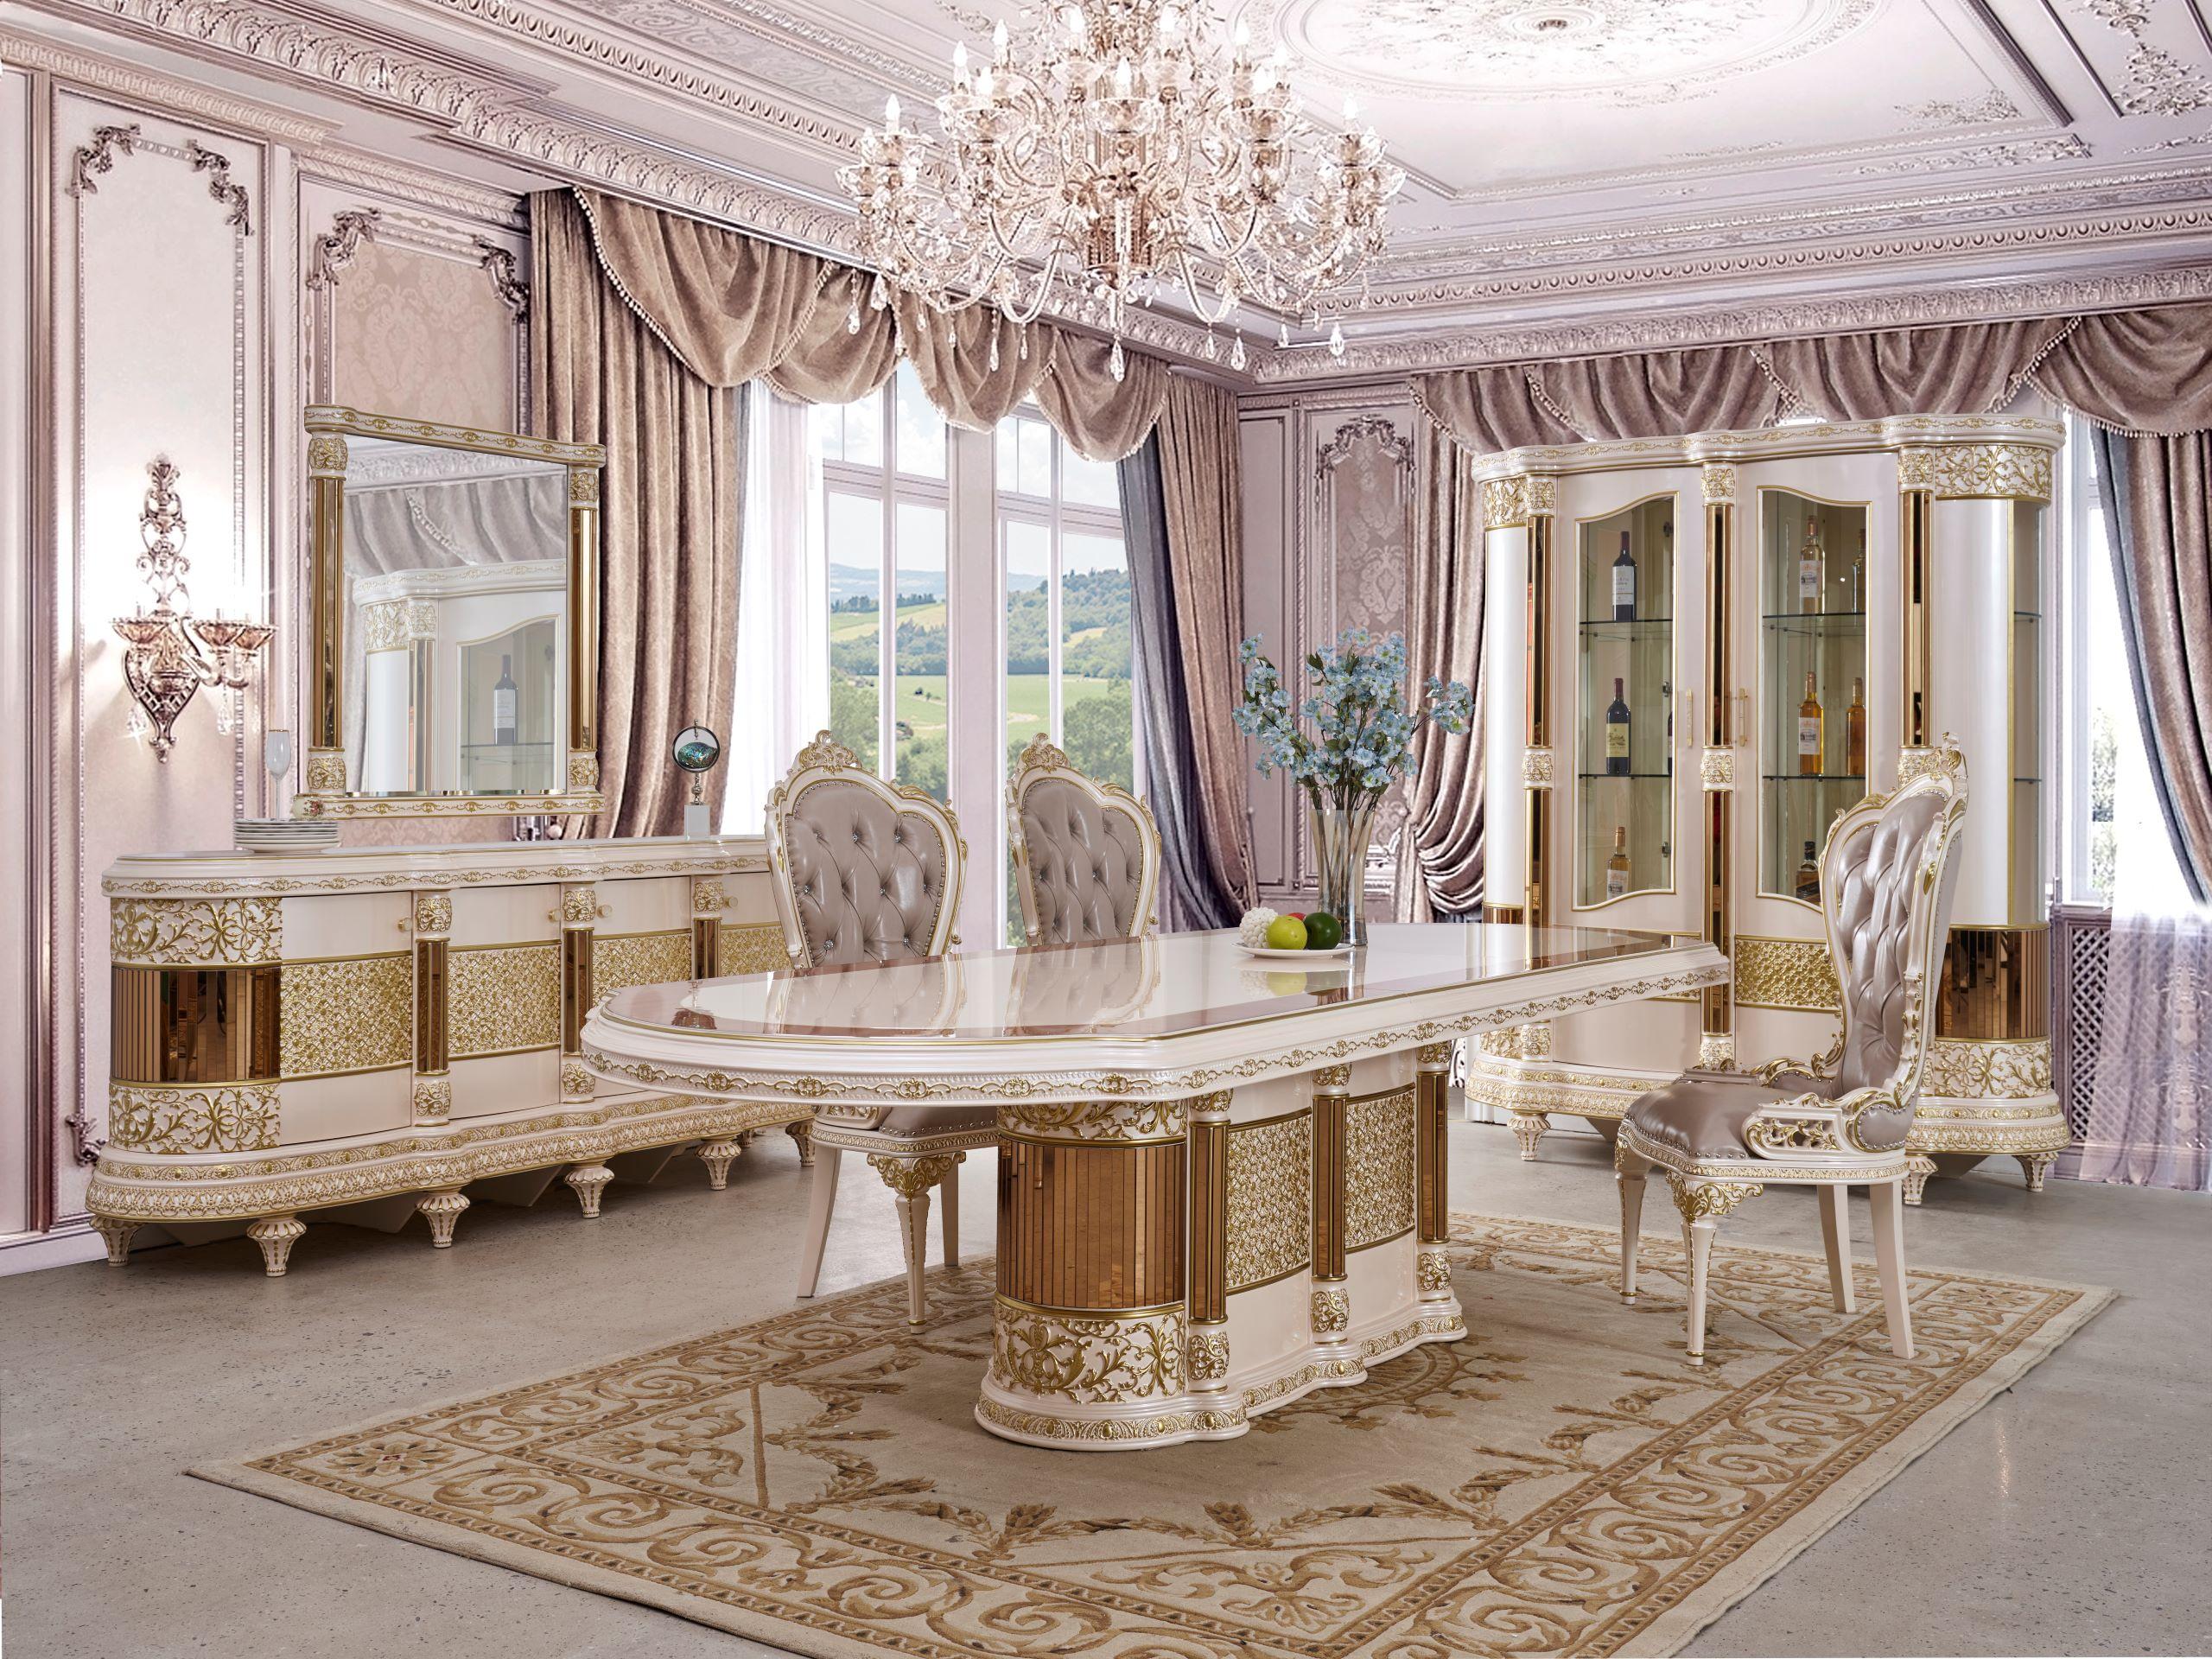 Classic, Traditional Dining Room Set HD-9022 Dining Room Set 7PCS HD-9022-7PCS HD-9022-7PCS in Gold, Beige Leather